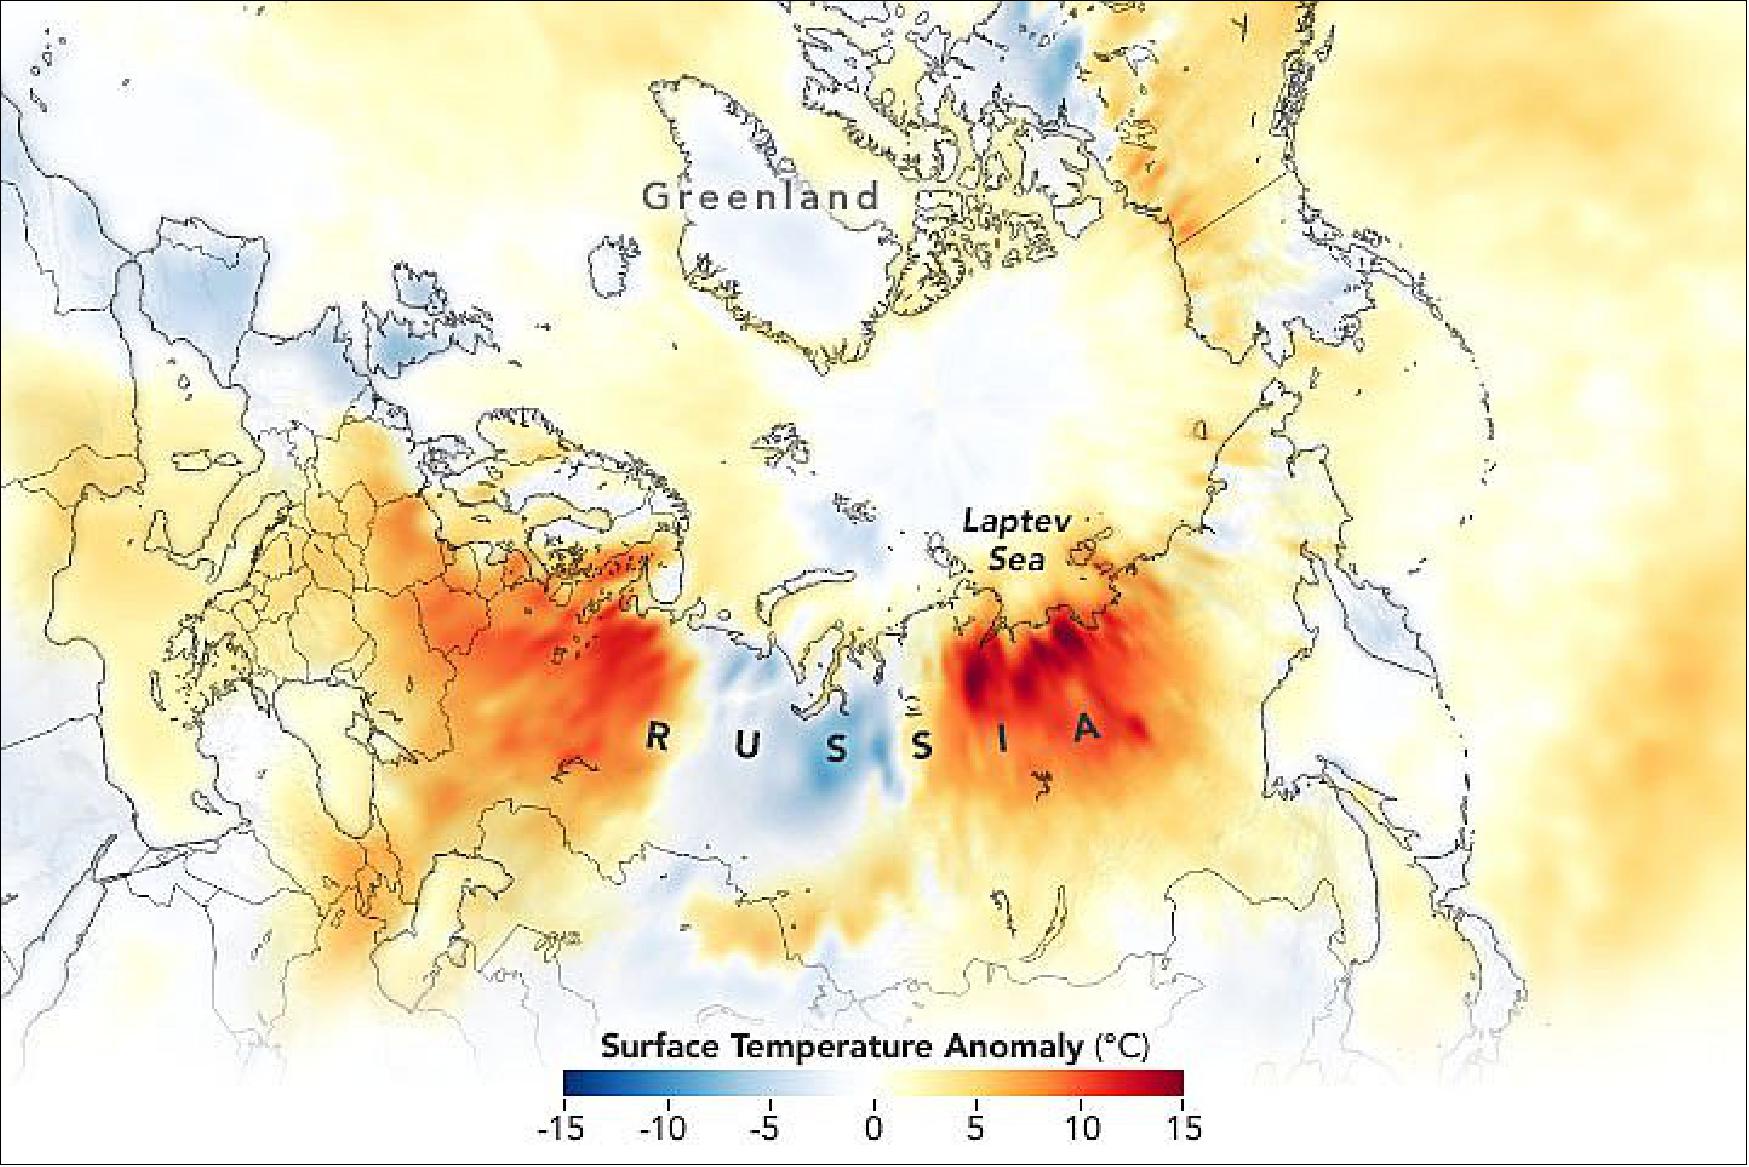 Figure 32: One of the hot spots parked over central and eastern Europe. On June 23, ground stations in Moscow measured an air temperature of 34.8°C (94.6°F)—the city’s hottest June temperature on record. Helsinki, Finland, also saw its hottest June day on record (31.7°C/89.1°F), and national records for the month were set in Belarus (35.7°C/96.3°F) and Estonia (34.6°C/94.3°F), [image credit: NASA Earth Observatory images by Joshua Stevens, using AIRS data from the Goddard Earth Sciences Data and Information Services Center (GES DISC) and data from the National Snow and Ice Data Center. Story by Kathryn Hansen]